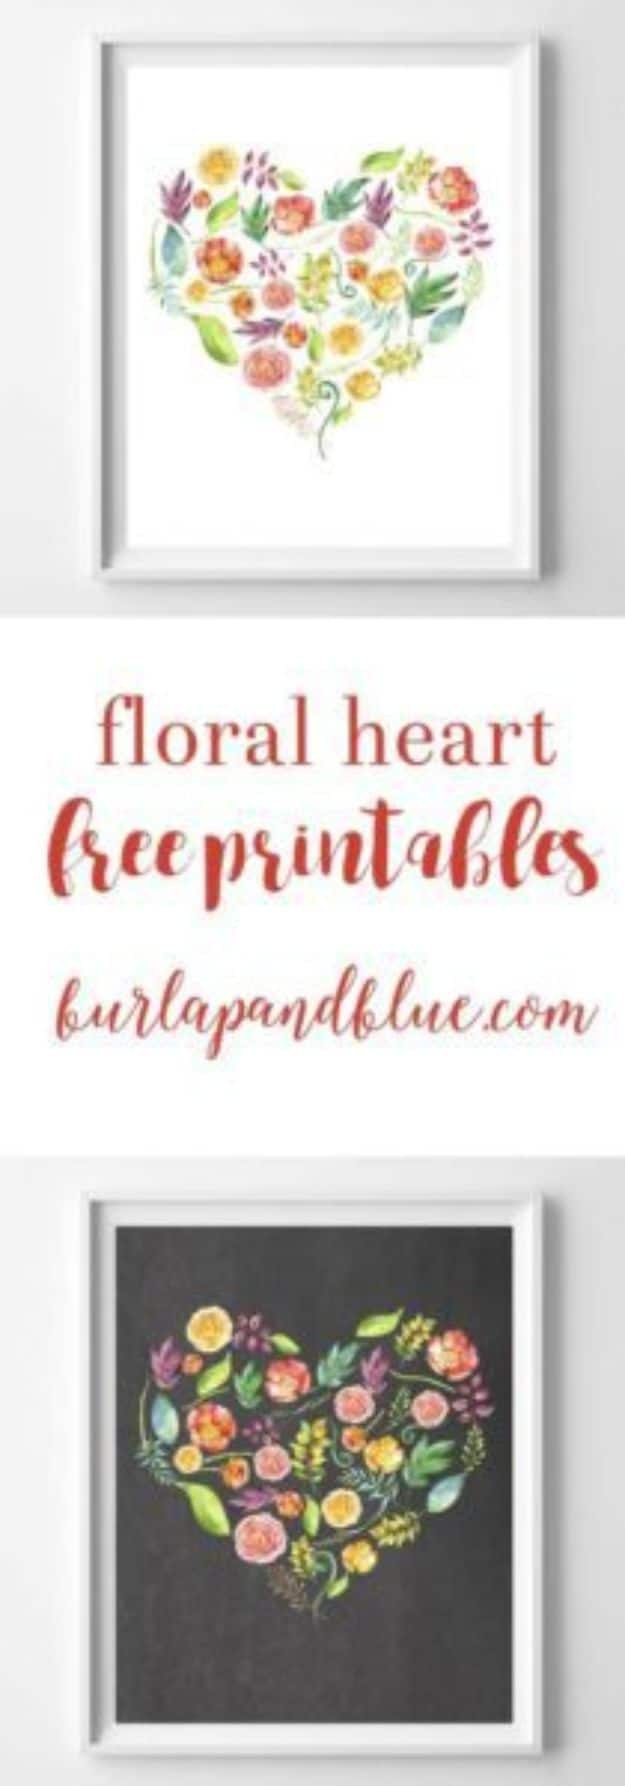 Best Free Printables for Crafts - Floral Heart Free Printables - Quotes, Templates, Paper Projects and Cards, DIY Gifts Cards, Stickers and Wall Art You Can Print At Home - Use These Fun Do It Yourself Template and Craft Ideas 